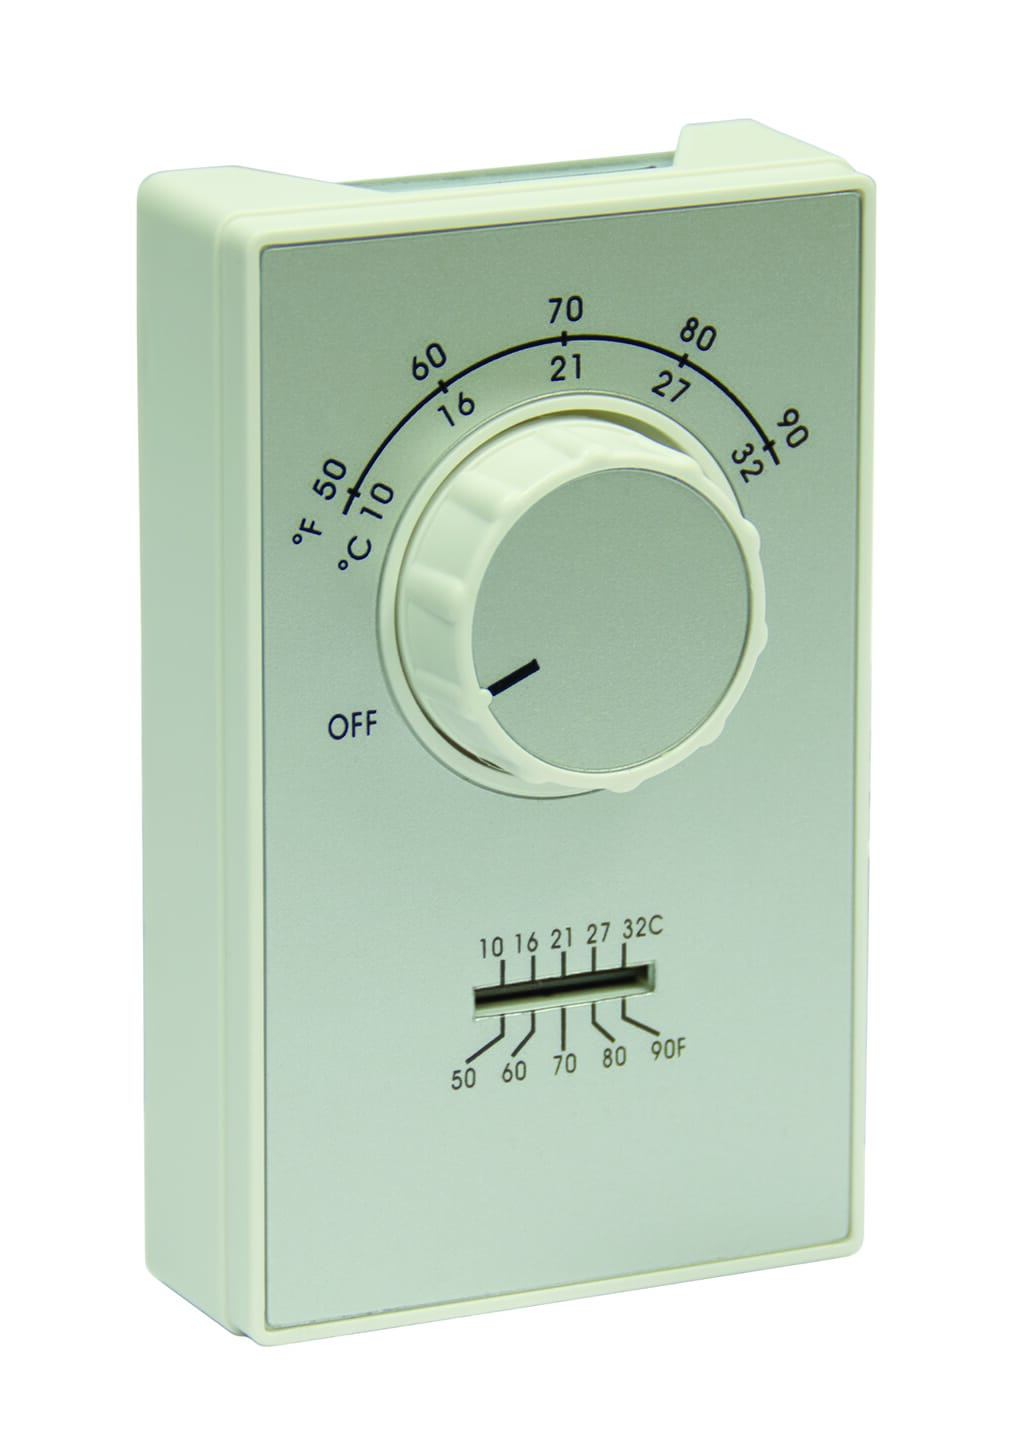 TPI AET9DWTS ET9 Wired Line Voltage Thermostat With Thermometer, 2-Pole Heat Only Thermostat, 50 to 90 deg F Control, 1/2 deg F Heating Anticipator Model Differential, Snap, DPST Switch, Import